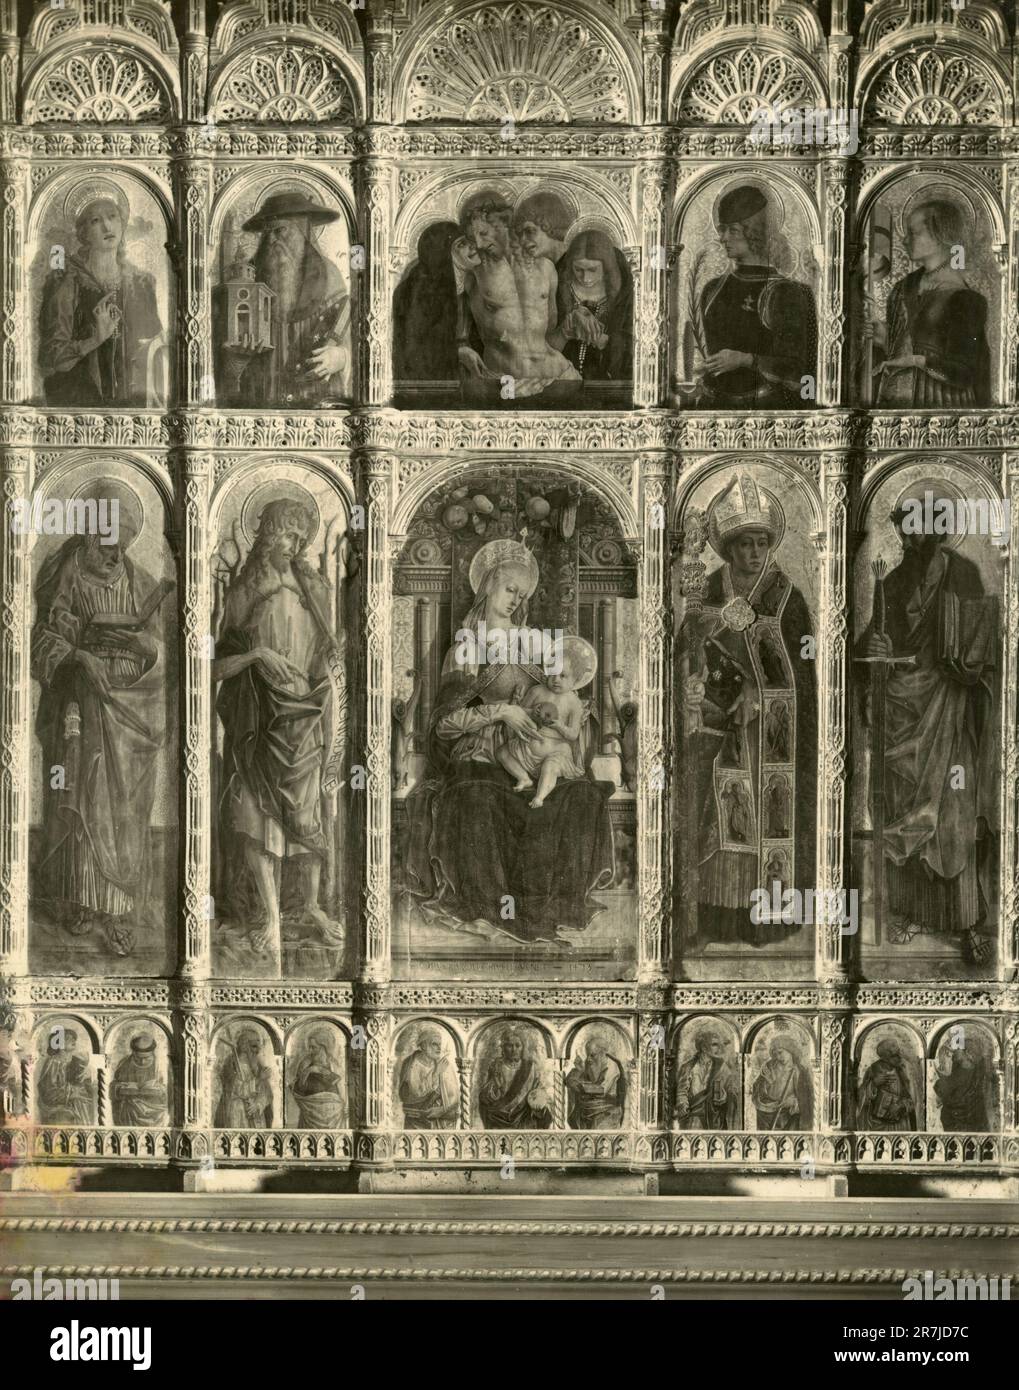 Madonna with Saints, polyptych by Italian artist Carlo Crivelli, Cathedral of Ascoli Piceno, Italy 1900s Stock Photo